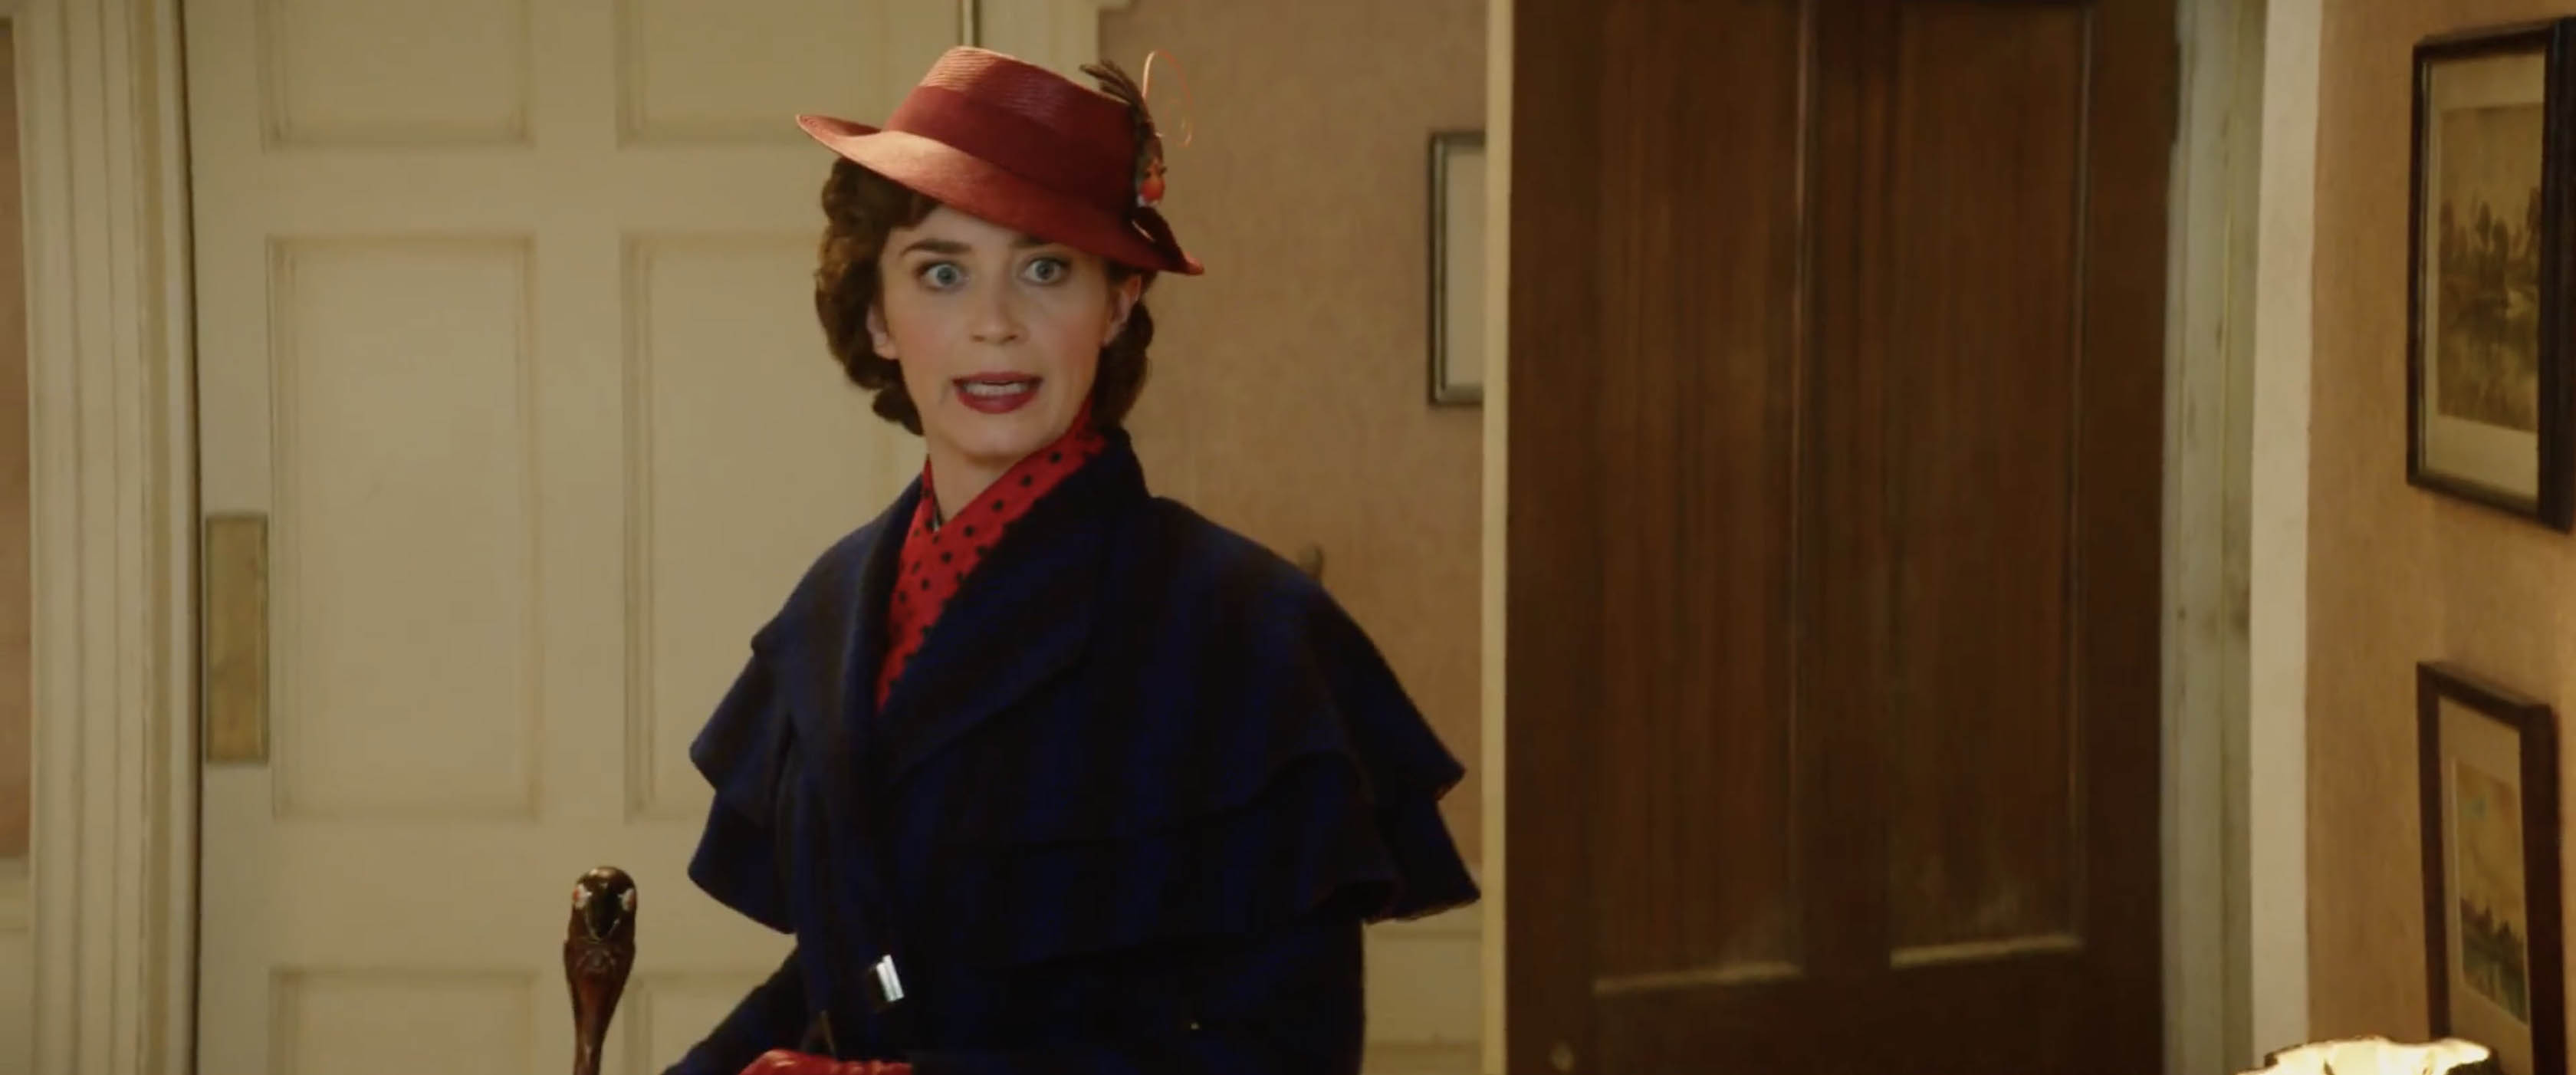 Mary Poppins Returns Trailer Will Give You All the Feels | The Nerdy3360 x 1402